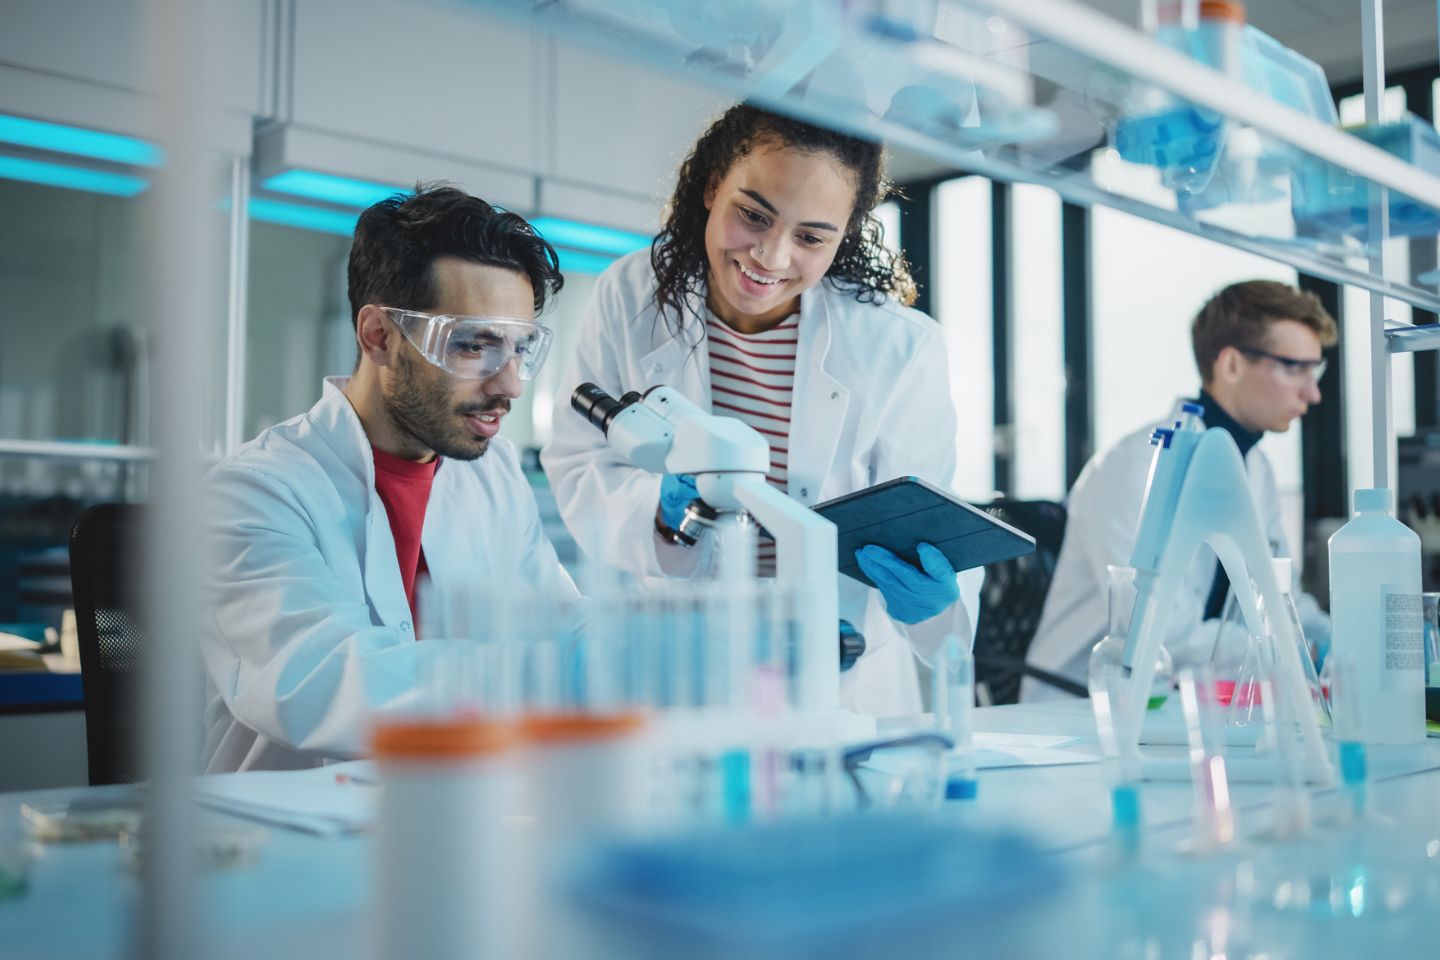 Stock photo of a man and woman working together in a research lab.